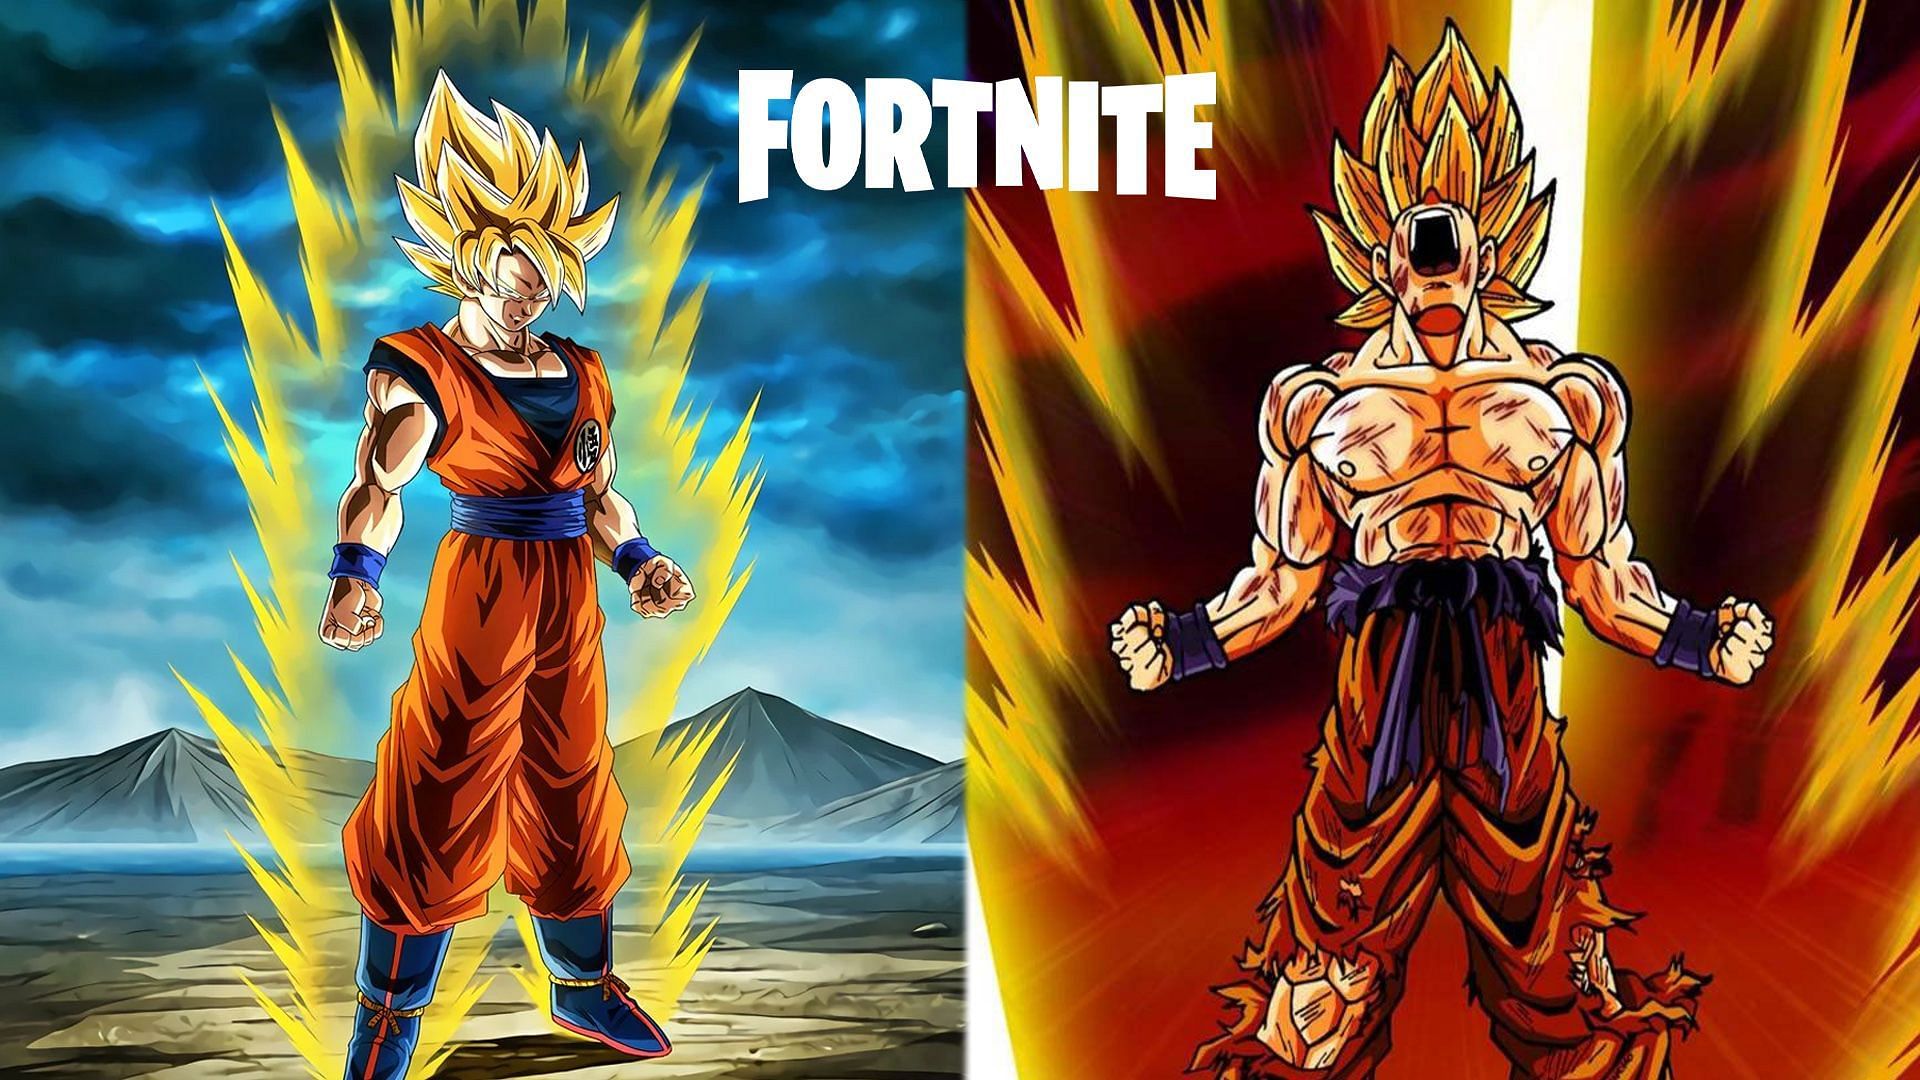 The Fortnite x Dragon Ball collaboration is getting much hype (Image via Sportskeeda)